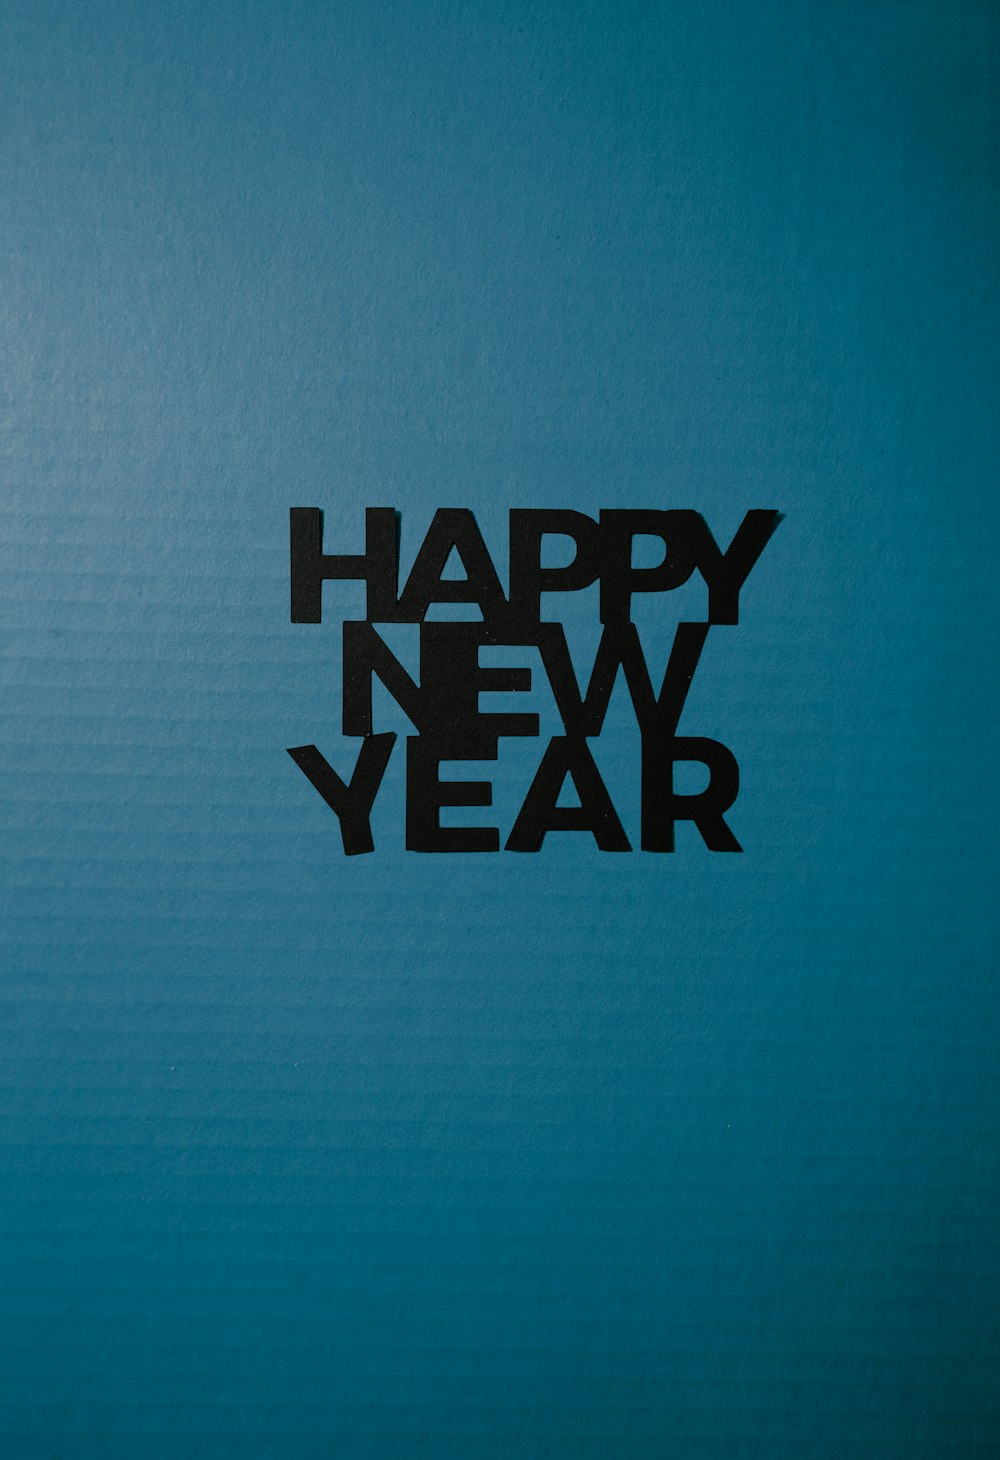 a picture of a happy new year written in black on a blue background